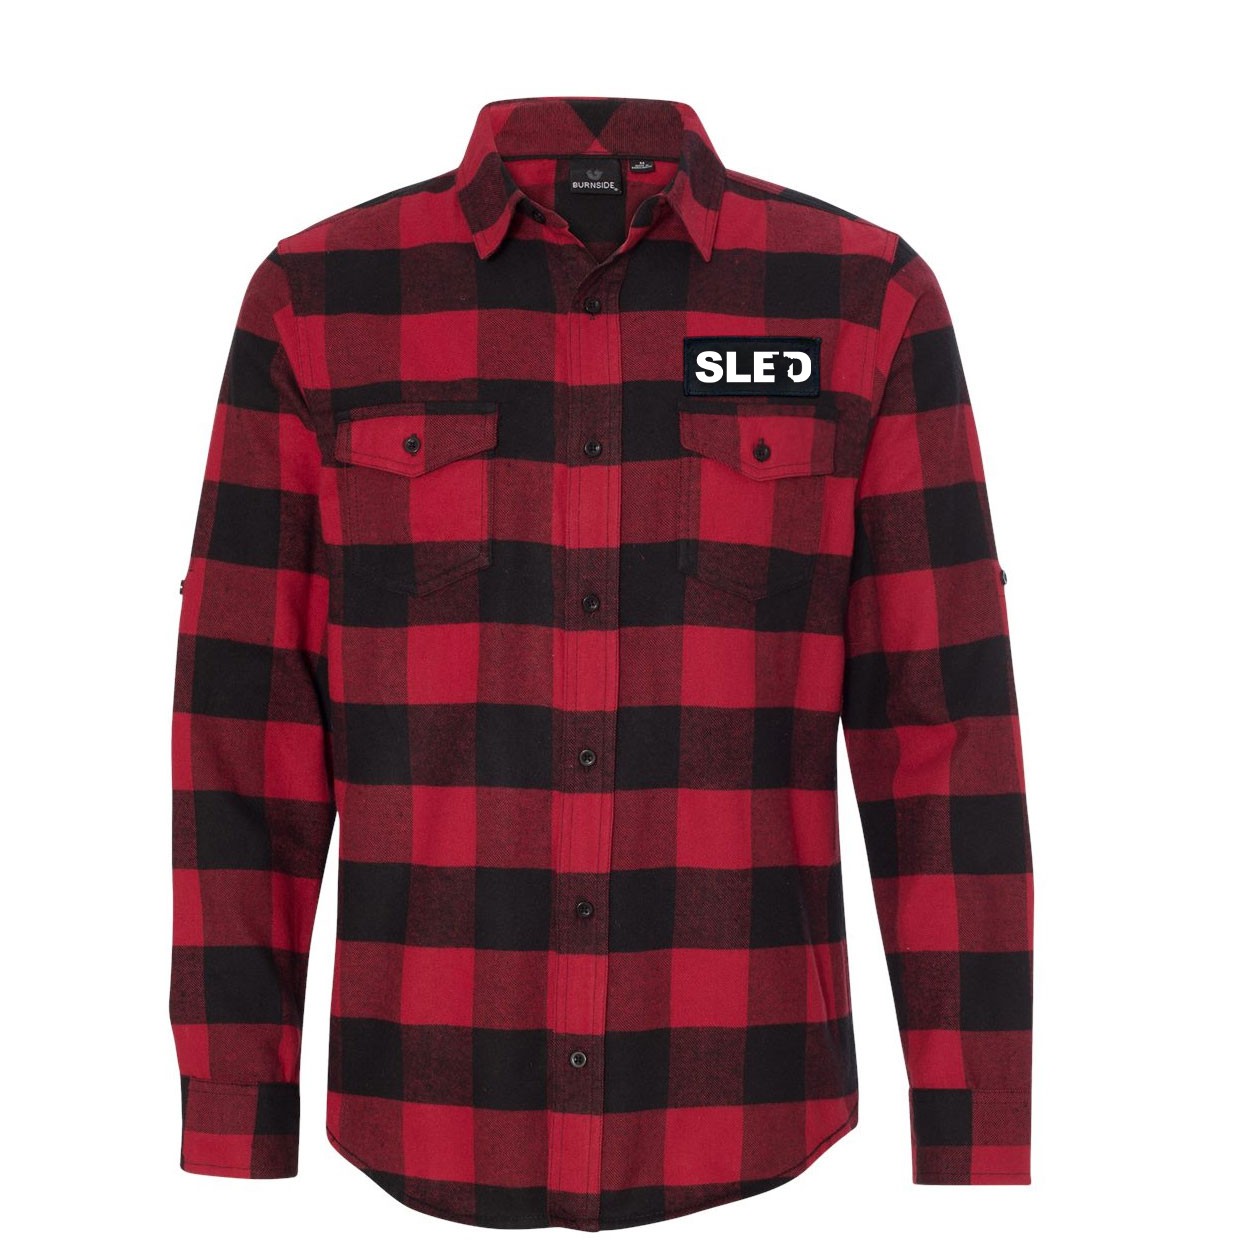 Sled Minnesota Night Out Rectangle Woven Patch Flannel Shirt Long Sleeve Red/Black Buffalo (White Logo)